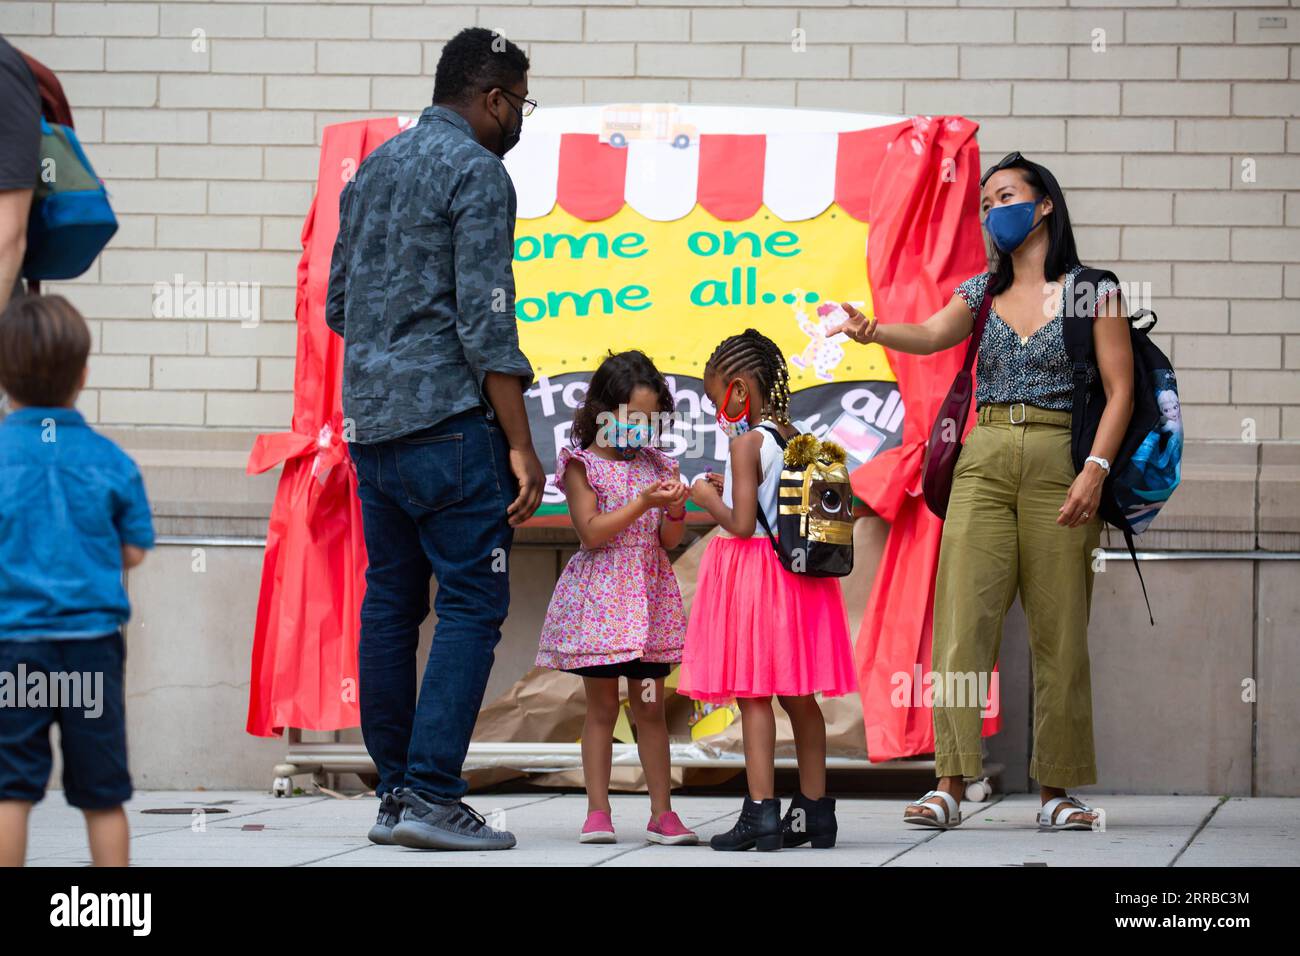 210914 -- NEW YORK, Sept. 14, 2021 -- Students are dismissed from the first day of school at PS 133 in the Brooklyn borough of New York, the United States, on Sept. 13, 2021. The public schools in New York City started a new school year with full in-person teaching and learning on Monday as many parents and teachers are still calling for an on-line option. The public school system in New York City, the biggest one in the United States with about 1.1 million students, saw the return of most of its students with joy and anxiety. Photo by /Xinhua U.S.-NEW YORK-SCHOOL-REOPENING MichaelxNagle PUBLI Stock Photo